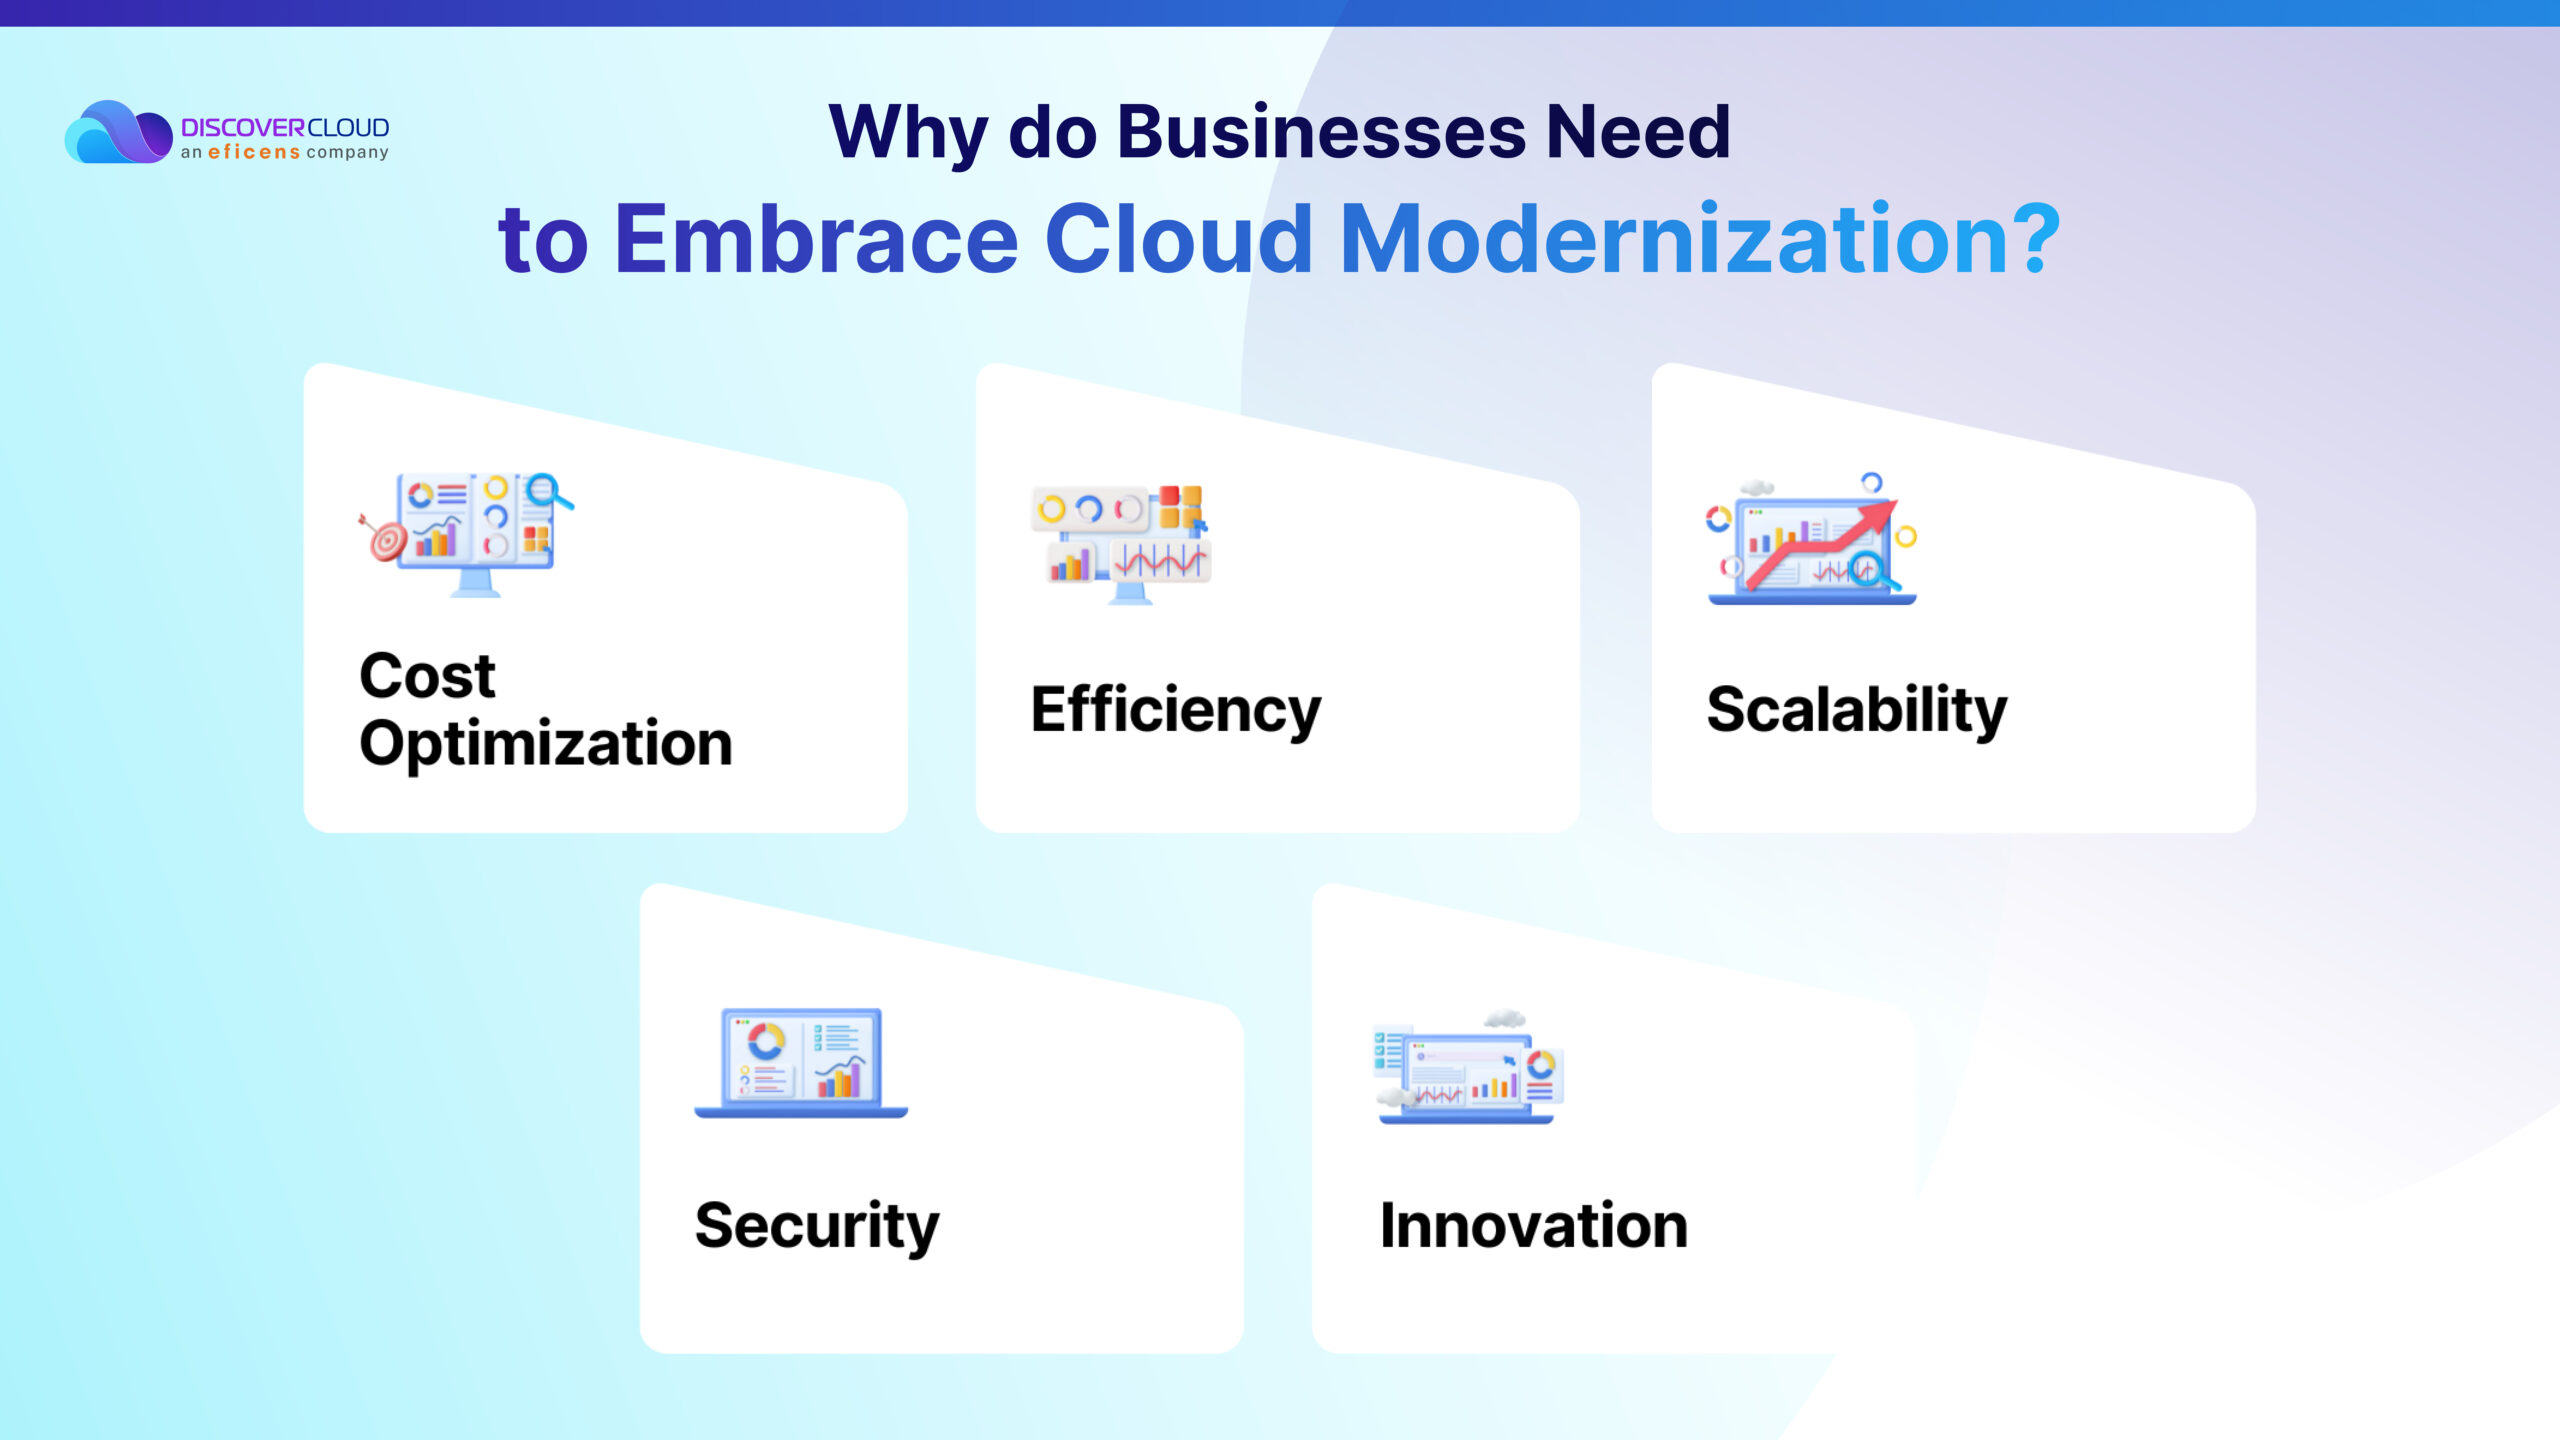 Why do Businesses Need to Embrace Cloud Modernization?